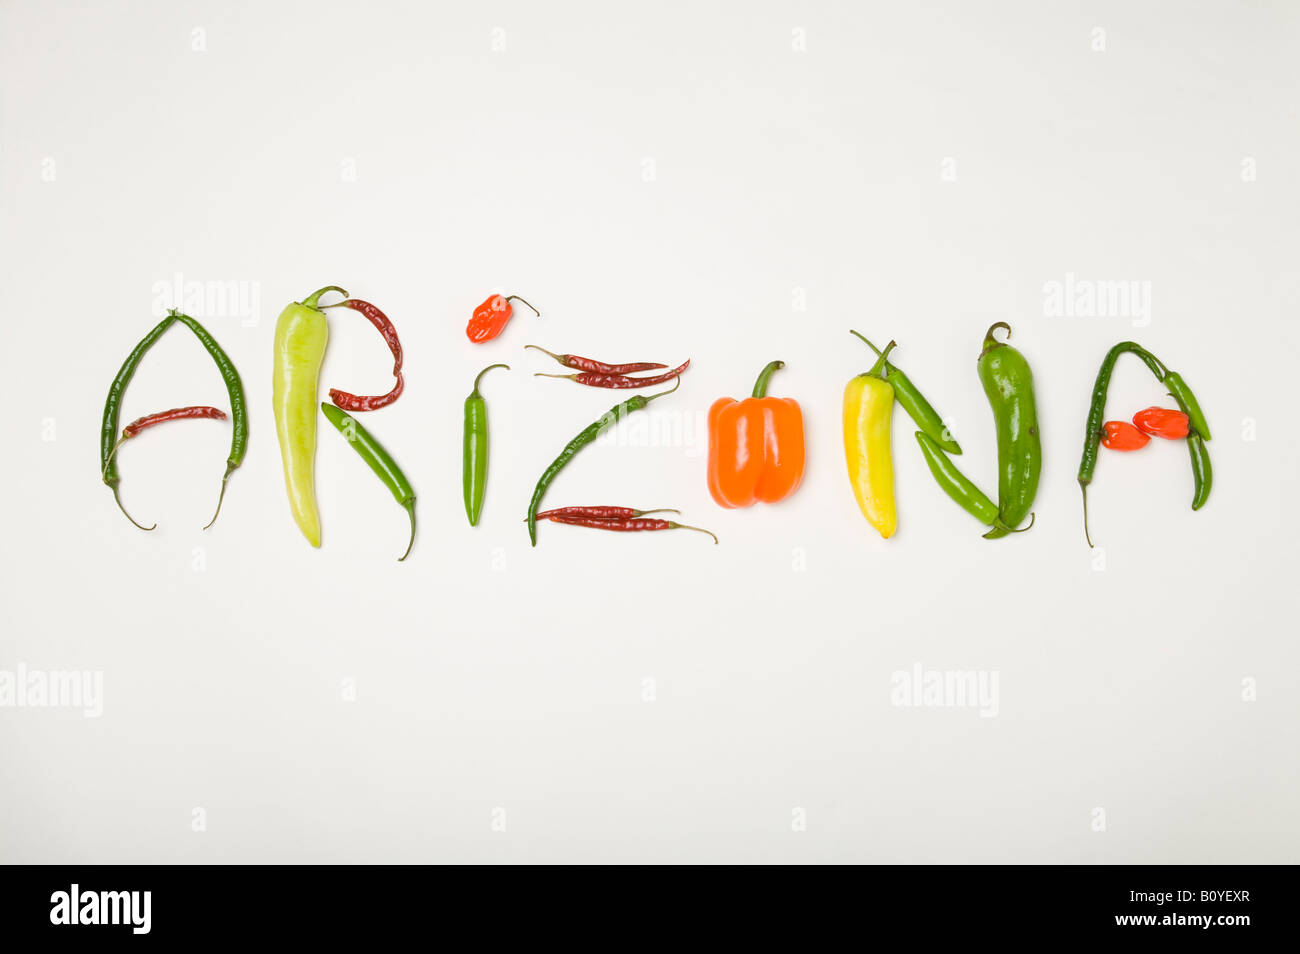 The USA state of Arizona spelled using a variety of chilies grown in Arizona Stock Photo